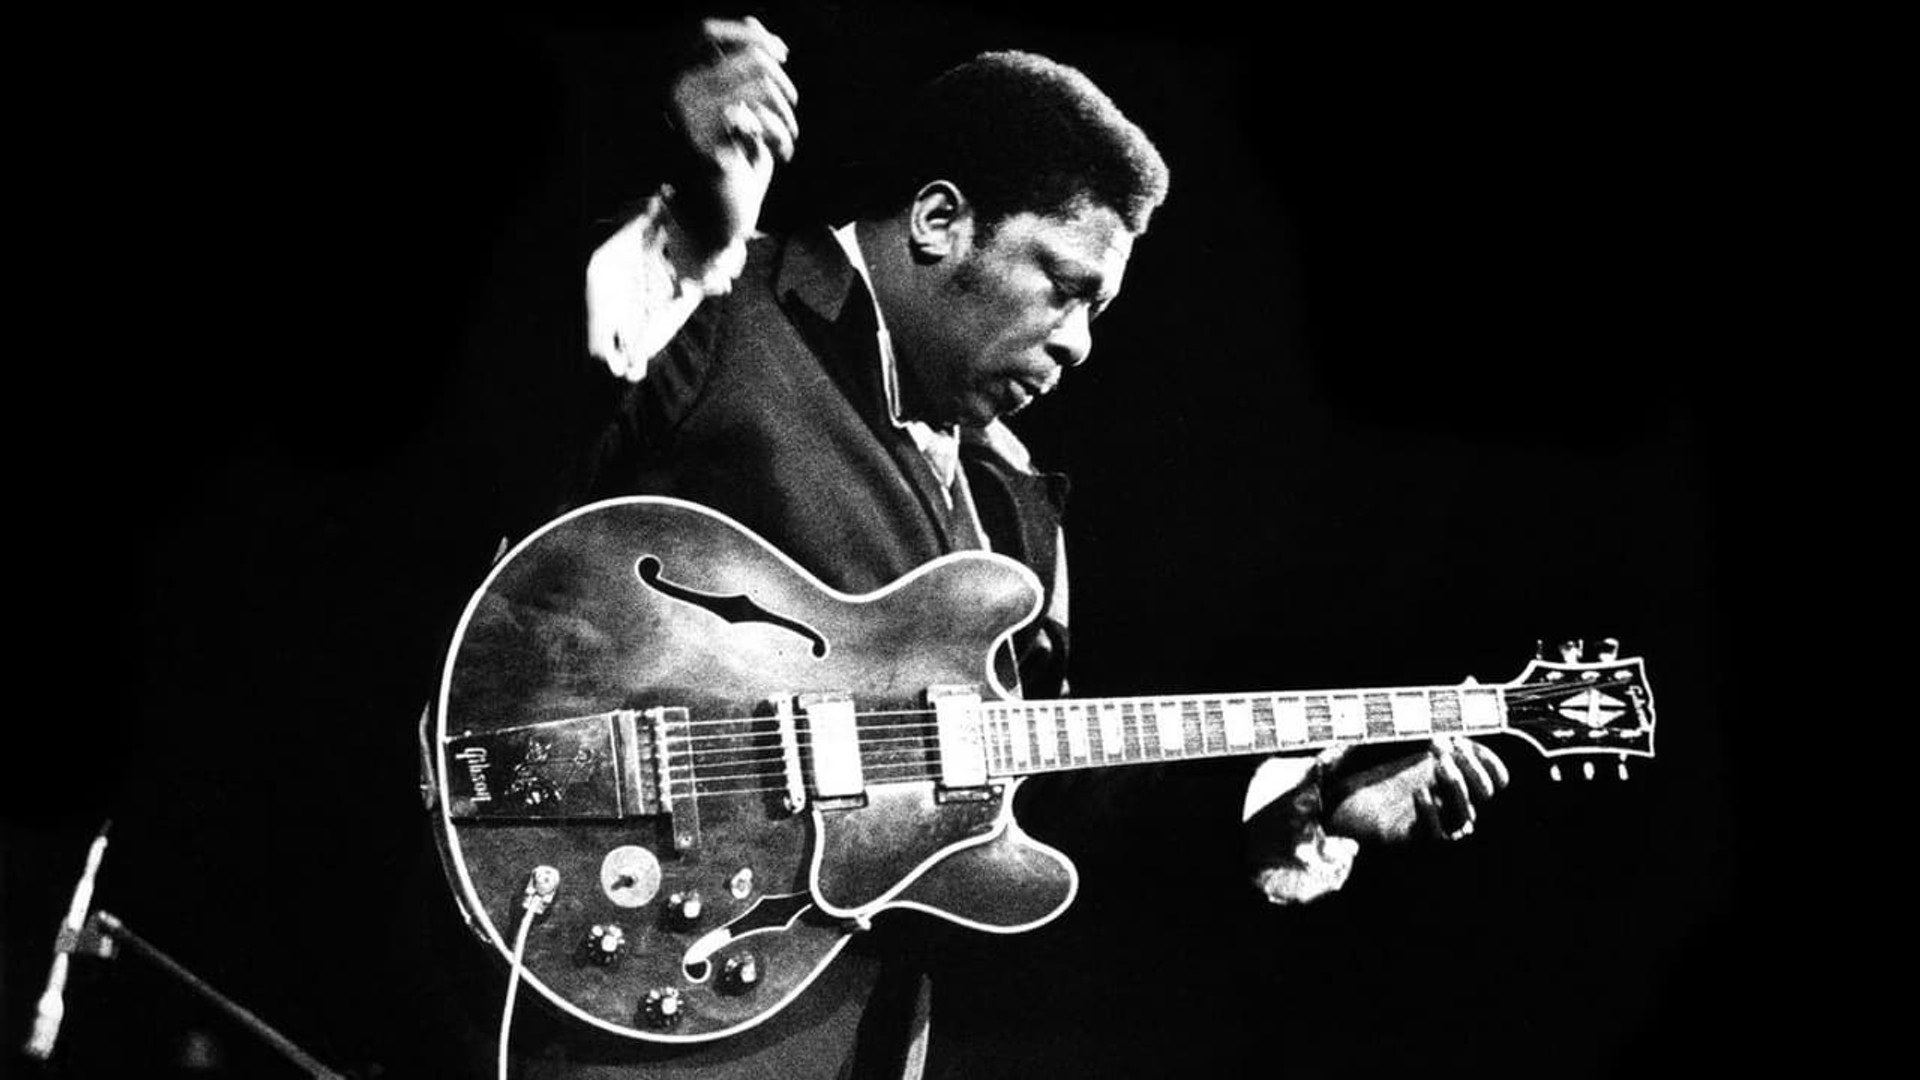 B.B. King: The Life of Riley background